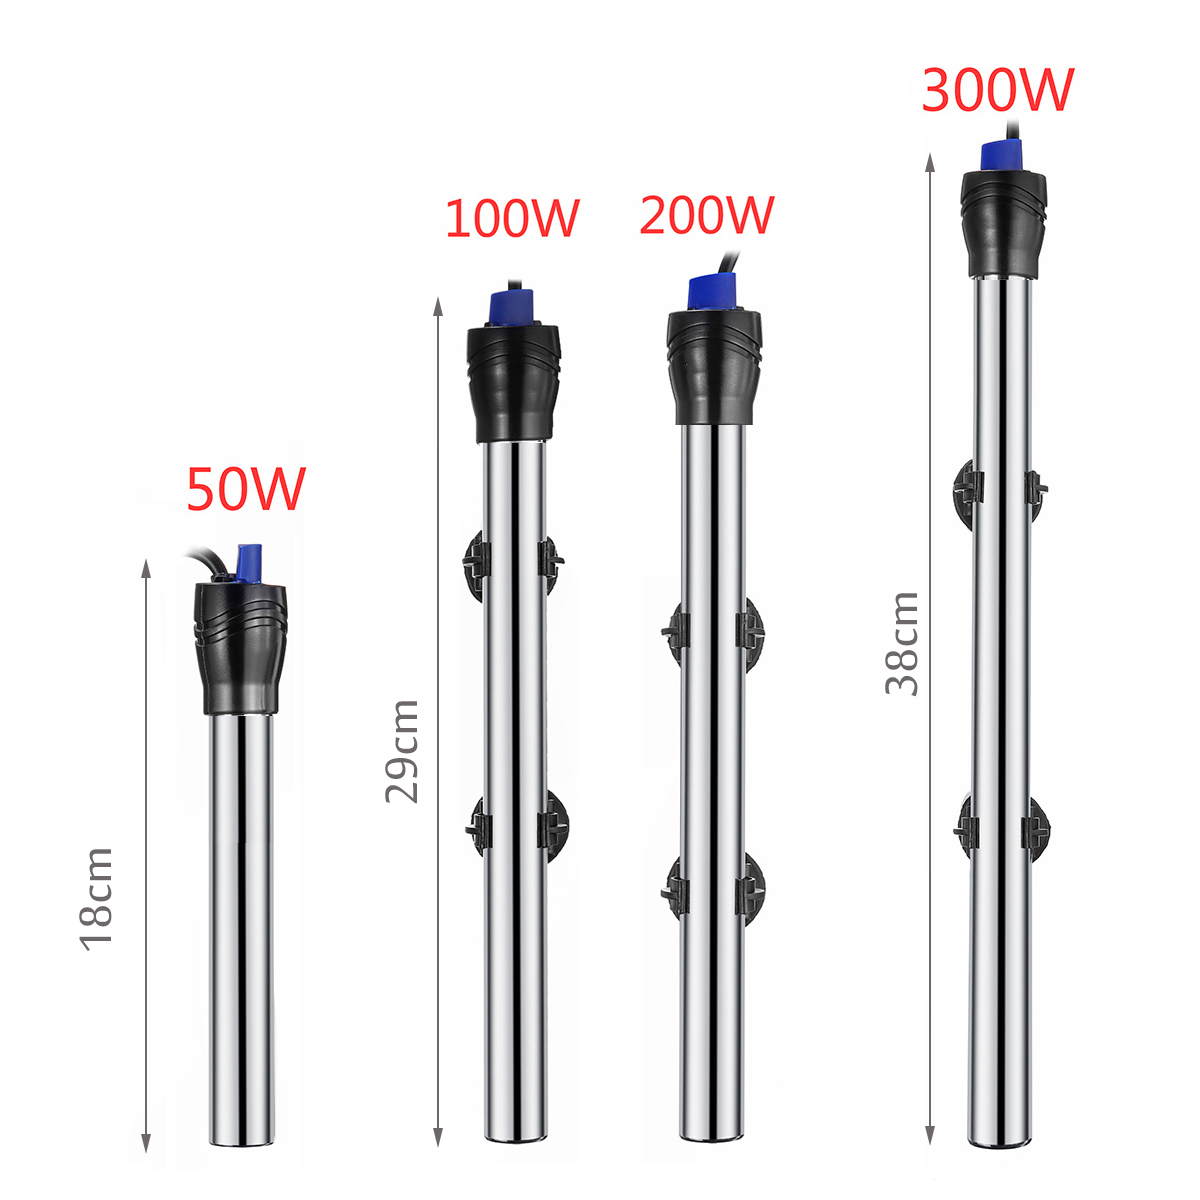 50W100W200W300W-Heating-Rod-Submersible-Heater-Quick-Constant-Automatic-Power-Off-1372374-4